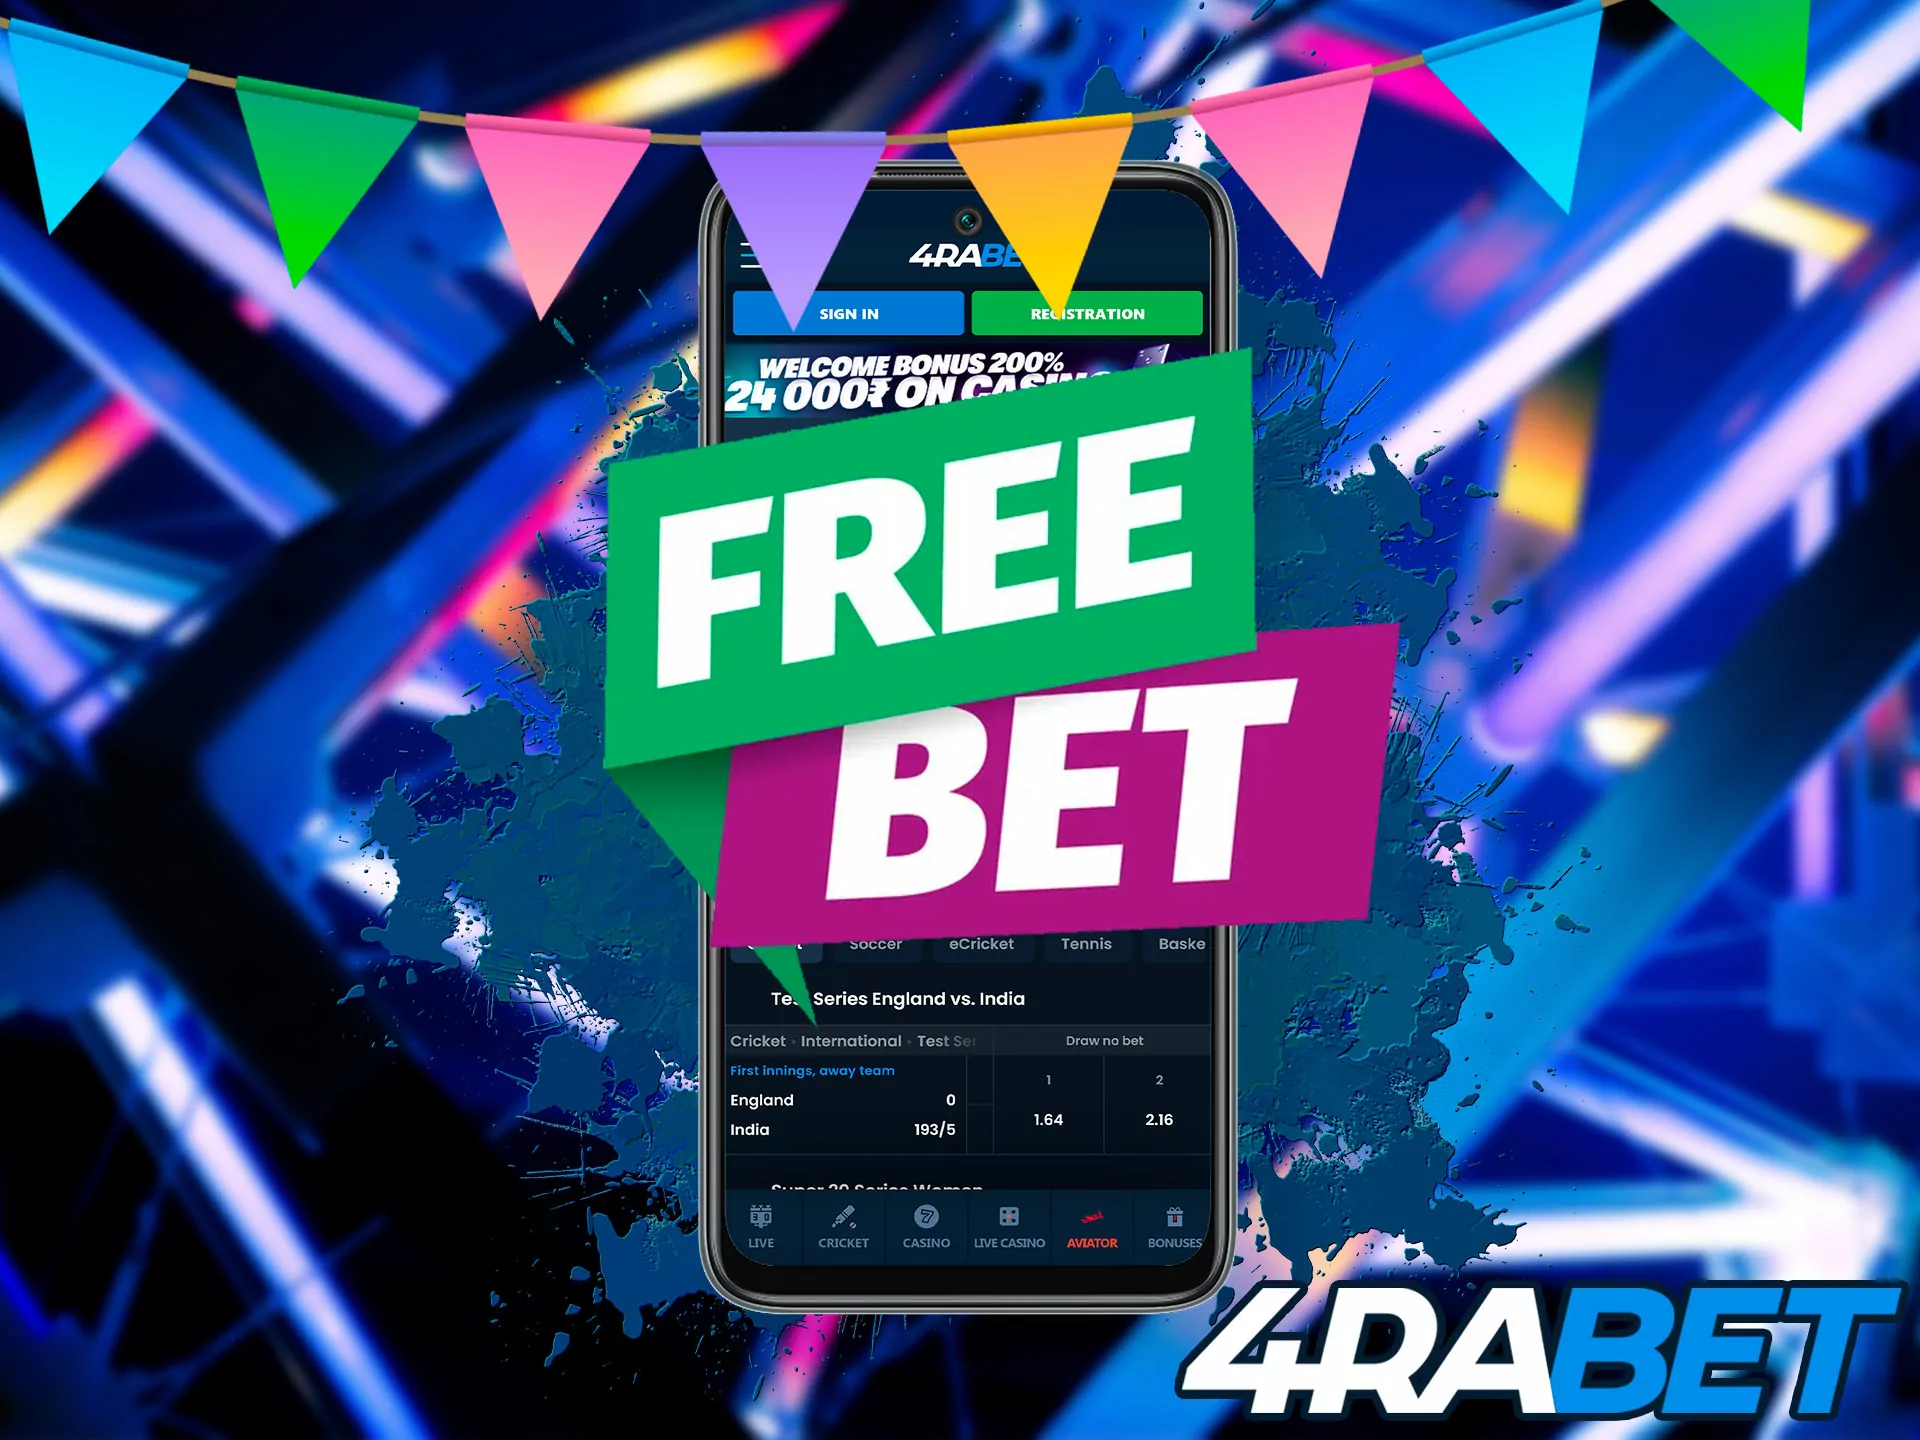 Every player has a chance to play for free in the casino, this feature is available for events with odds above 1.7.